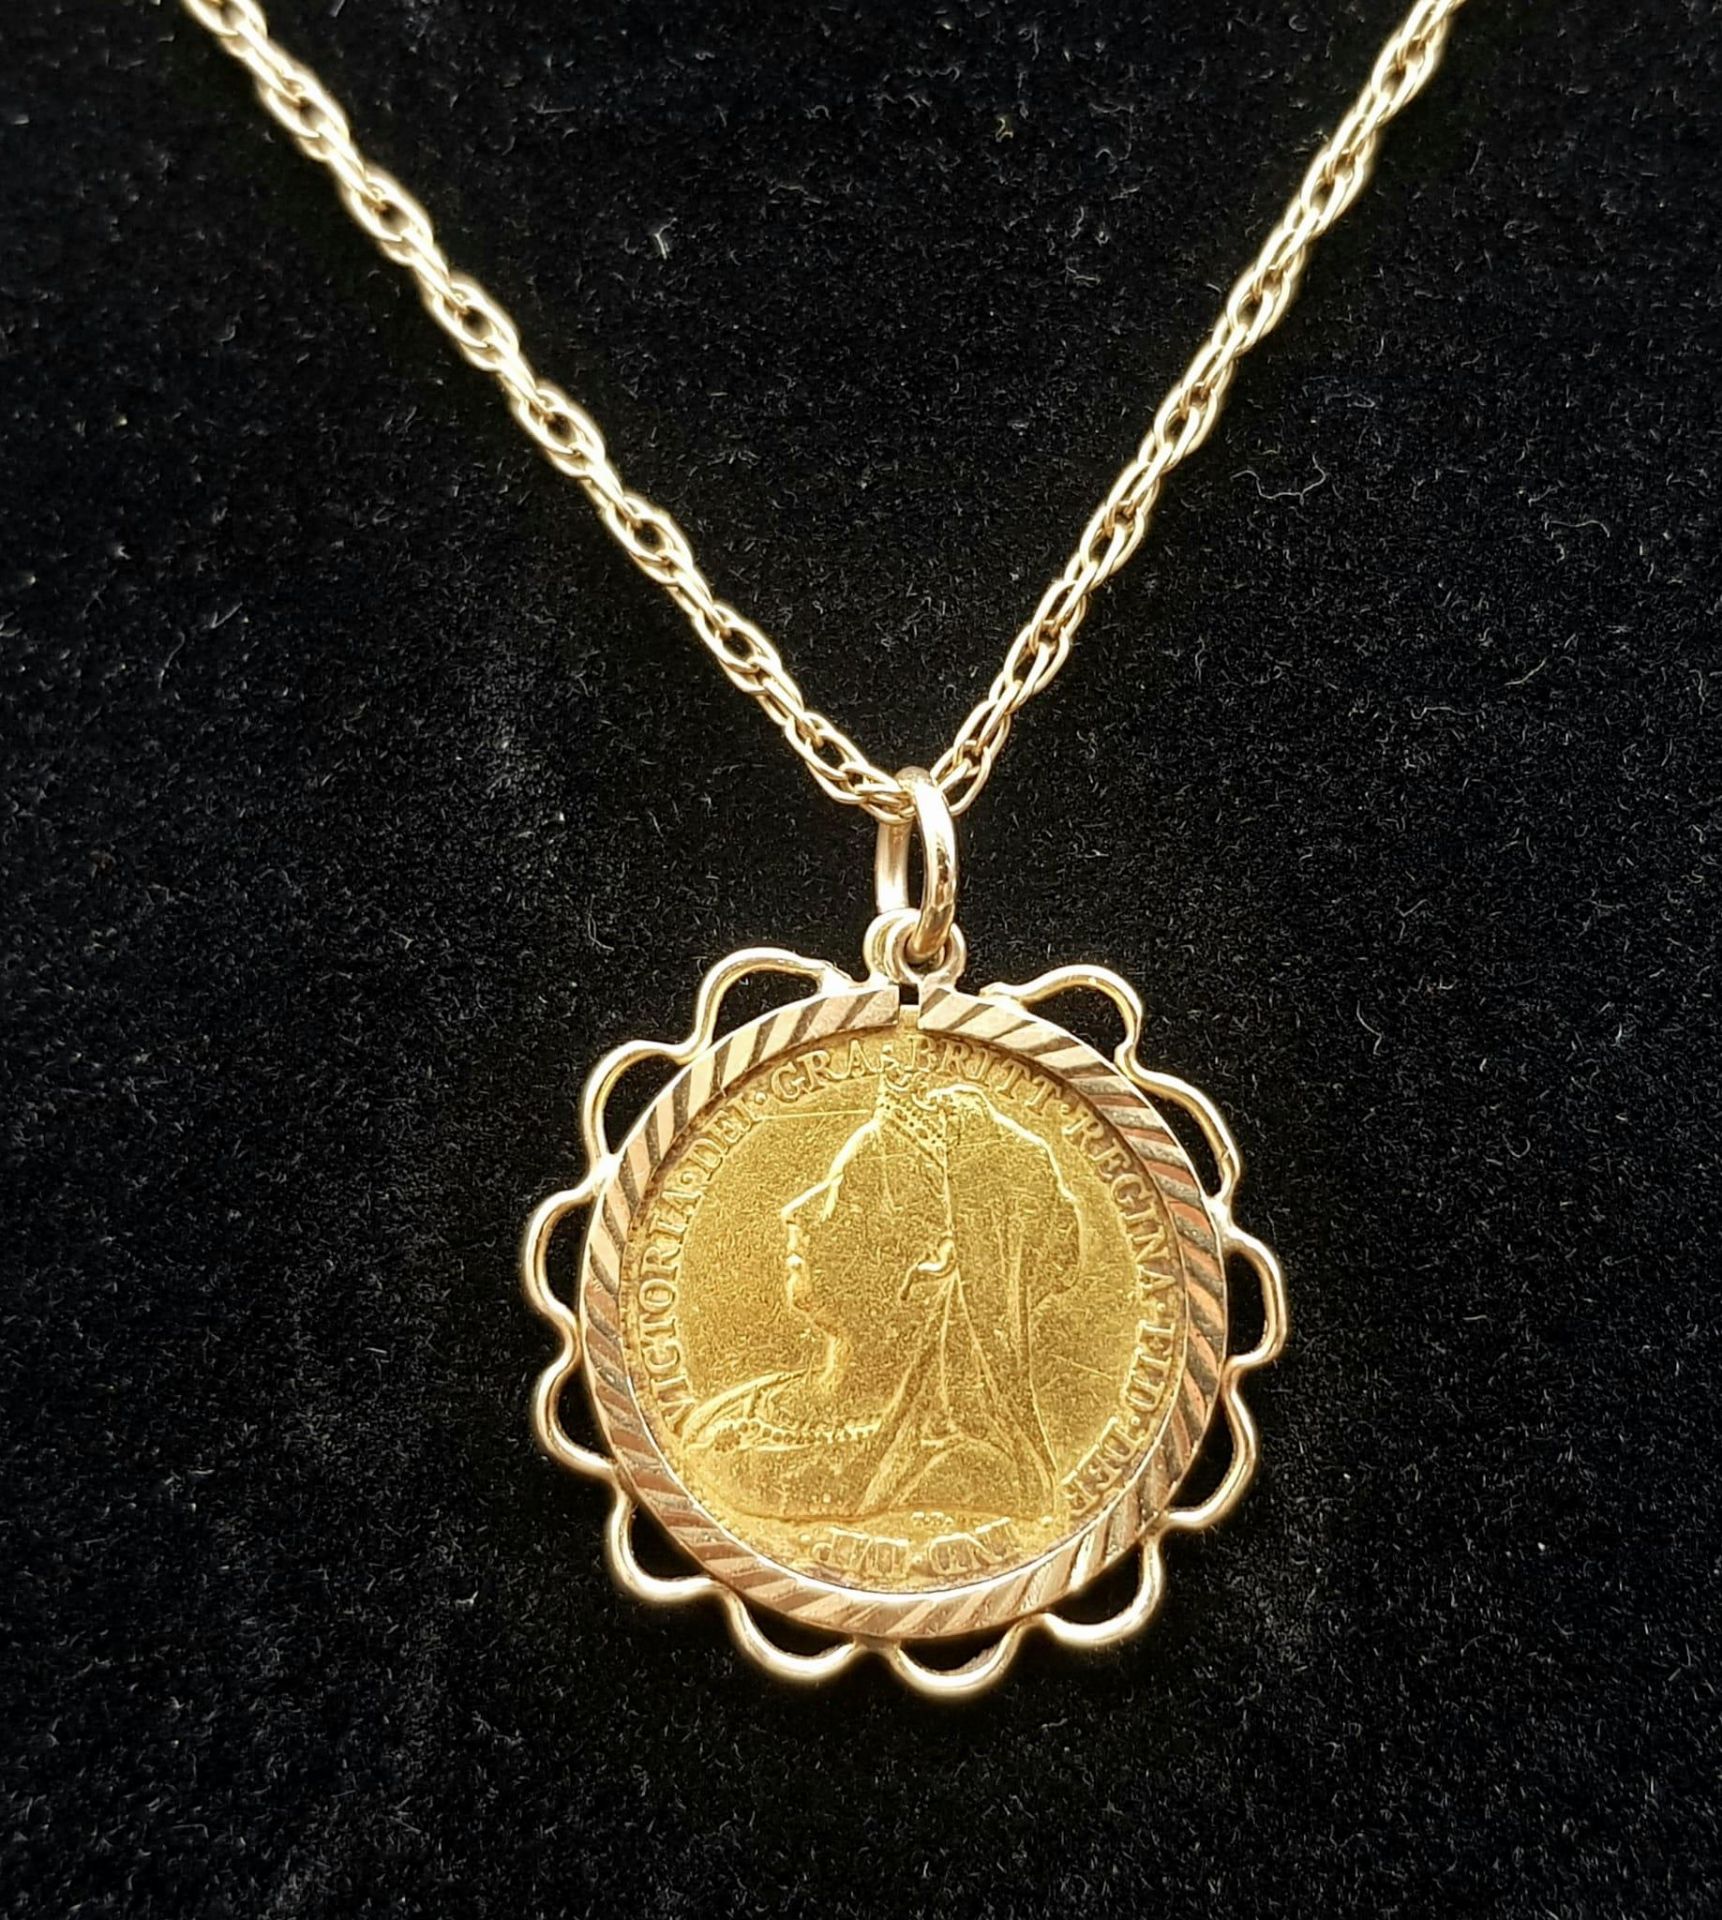 A 1900 22k Gold Queen Victoria Half Sovereign set in a 9K Gold Casing on a 9K Yellow Gold Chain - - Image 4 of 6